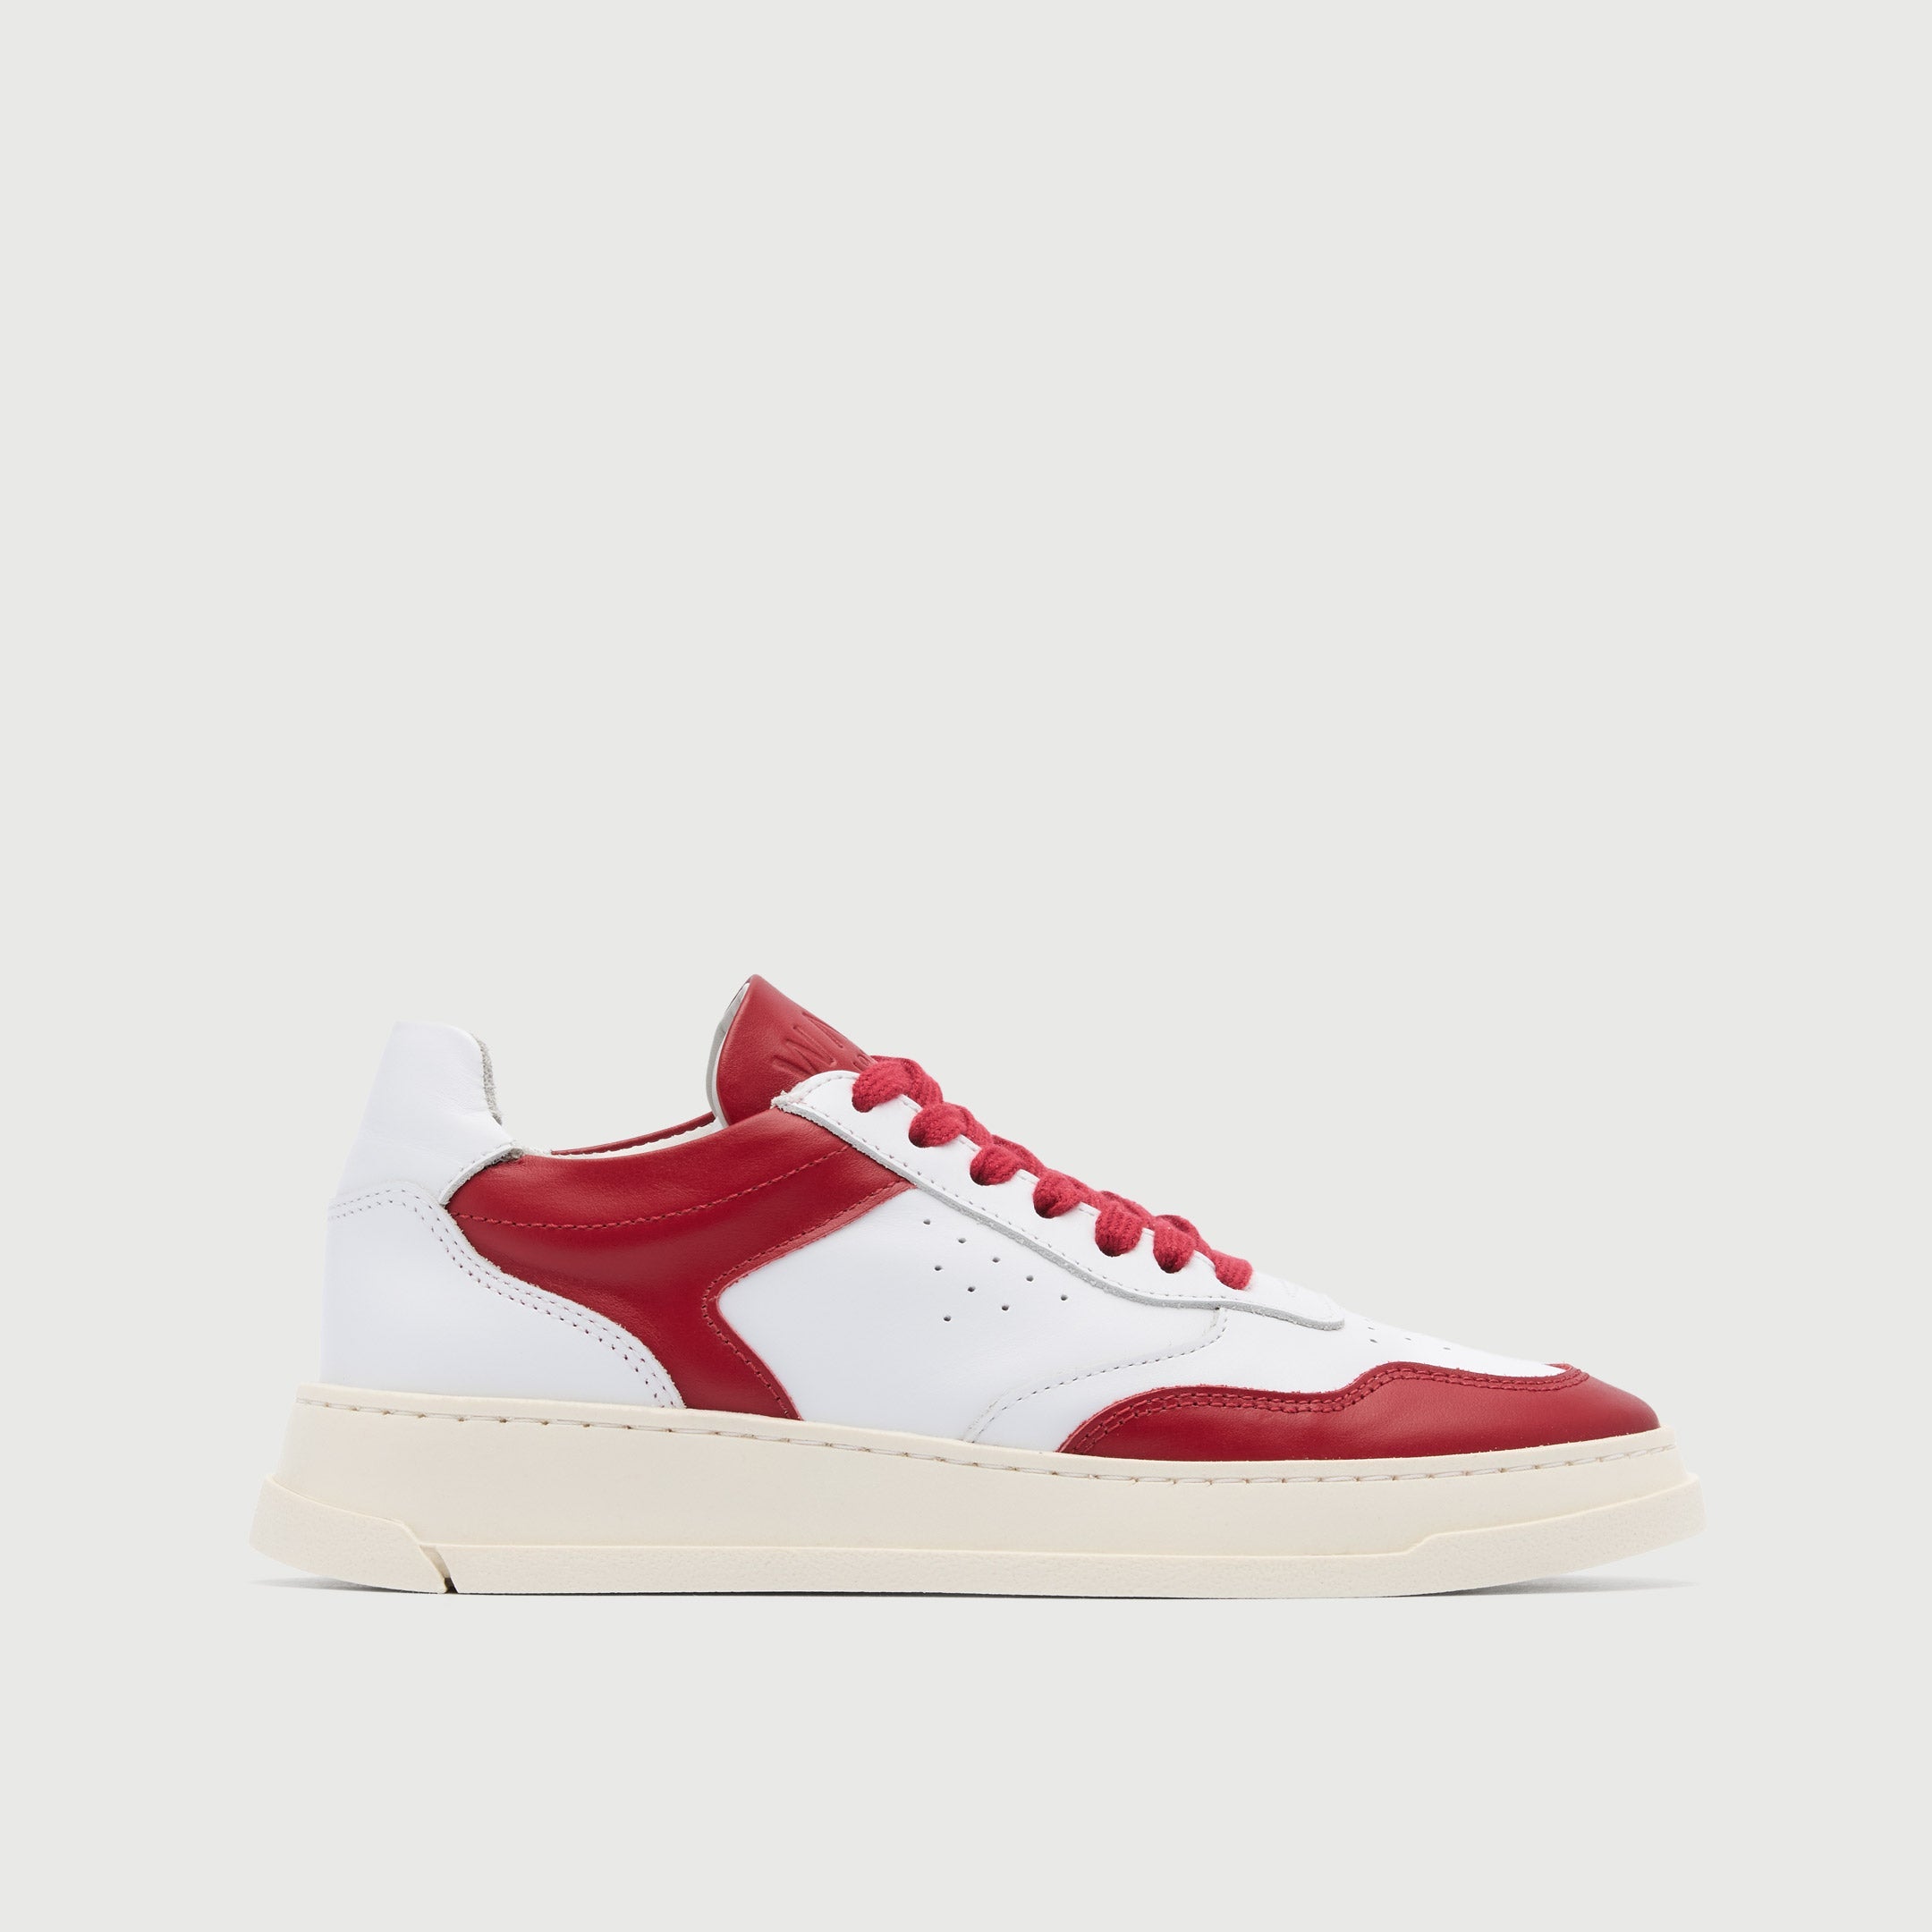 Walk London Womens Santa Rosa Trainer in White and Red Leather